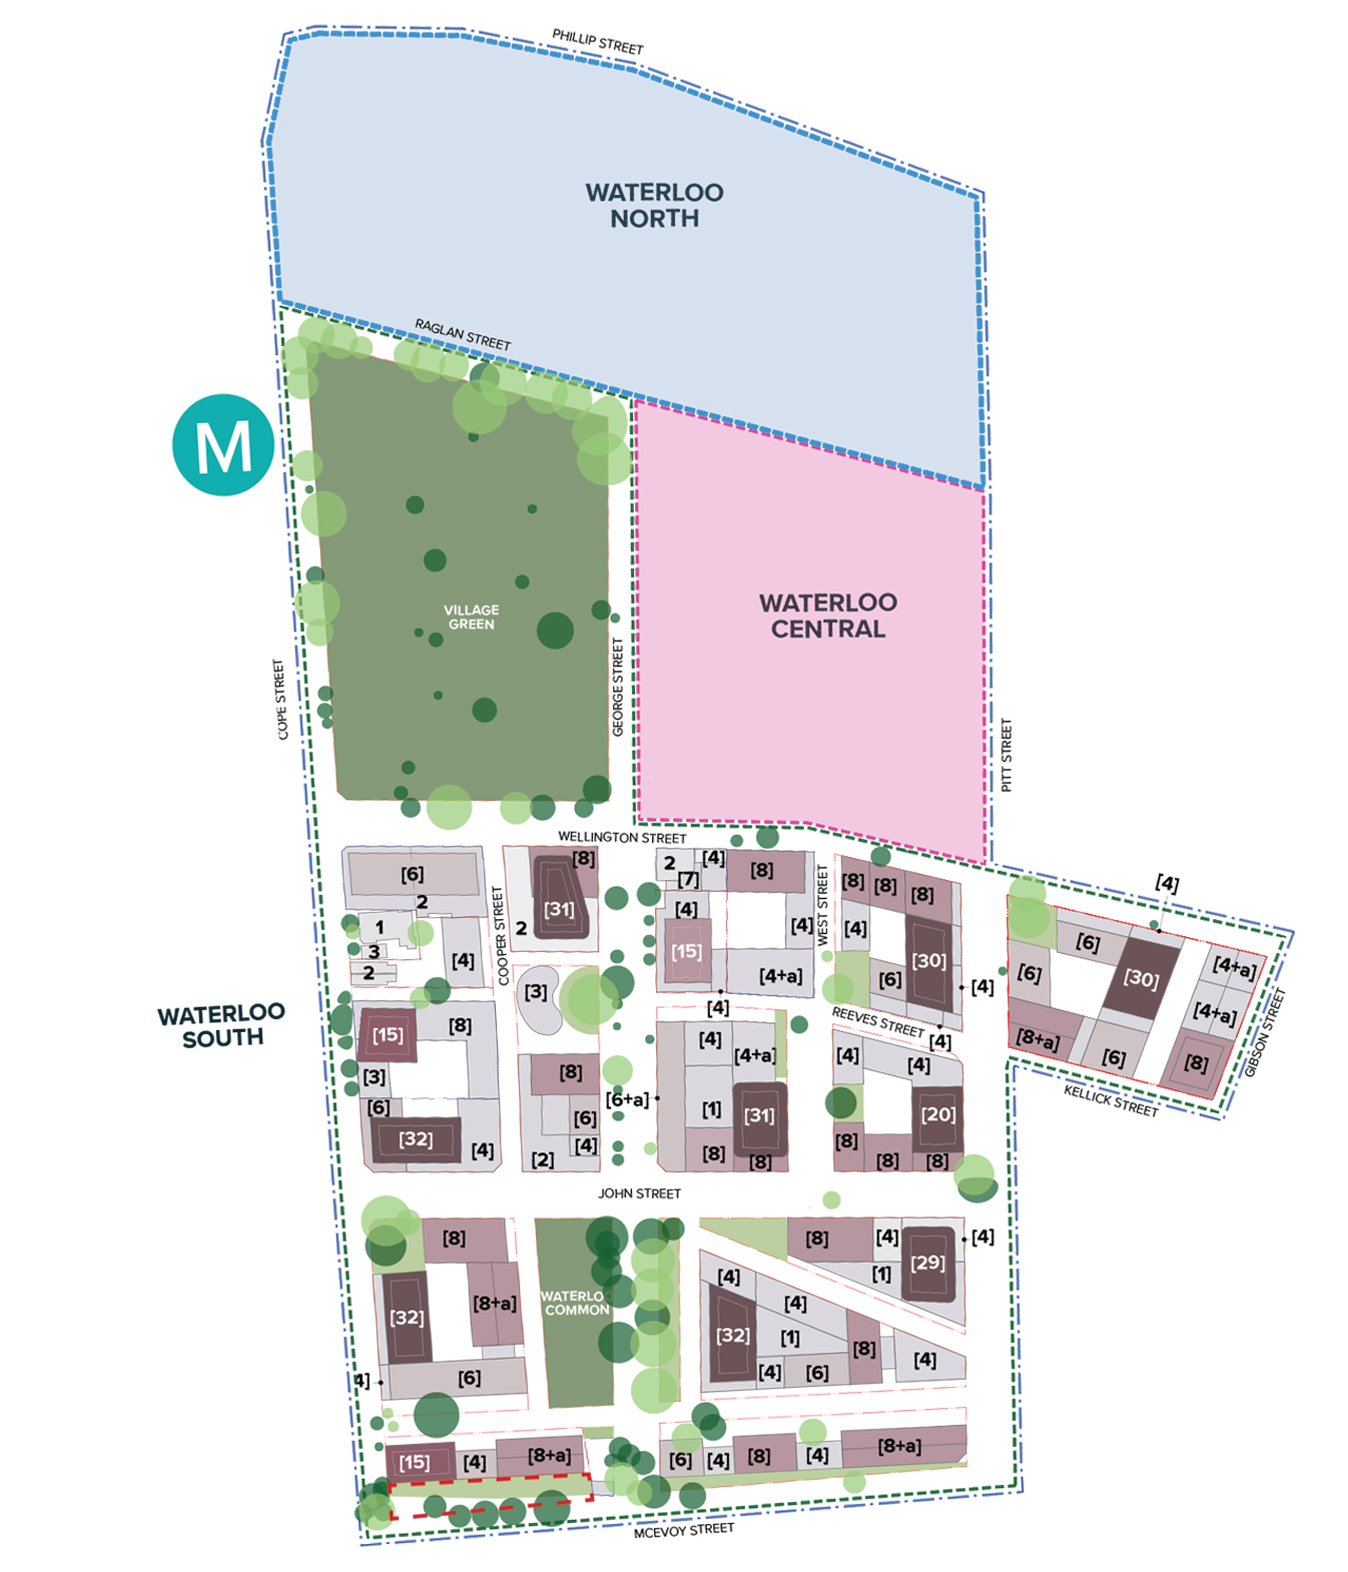 LAHC's Waterloo South Plan released by City of Sydney